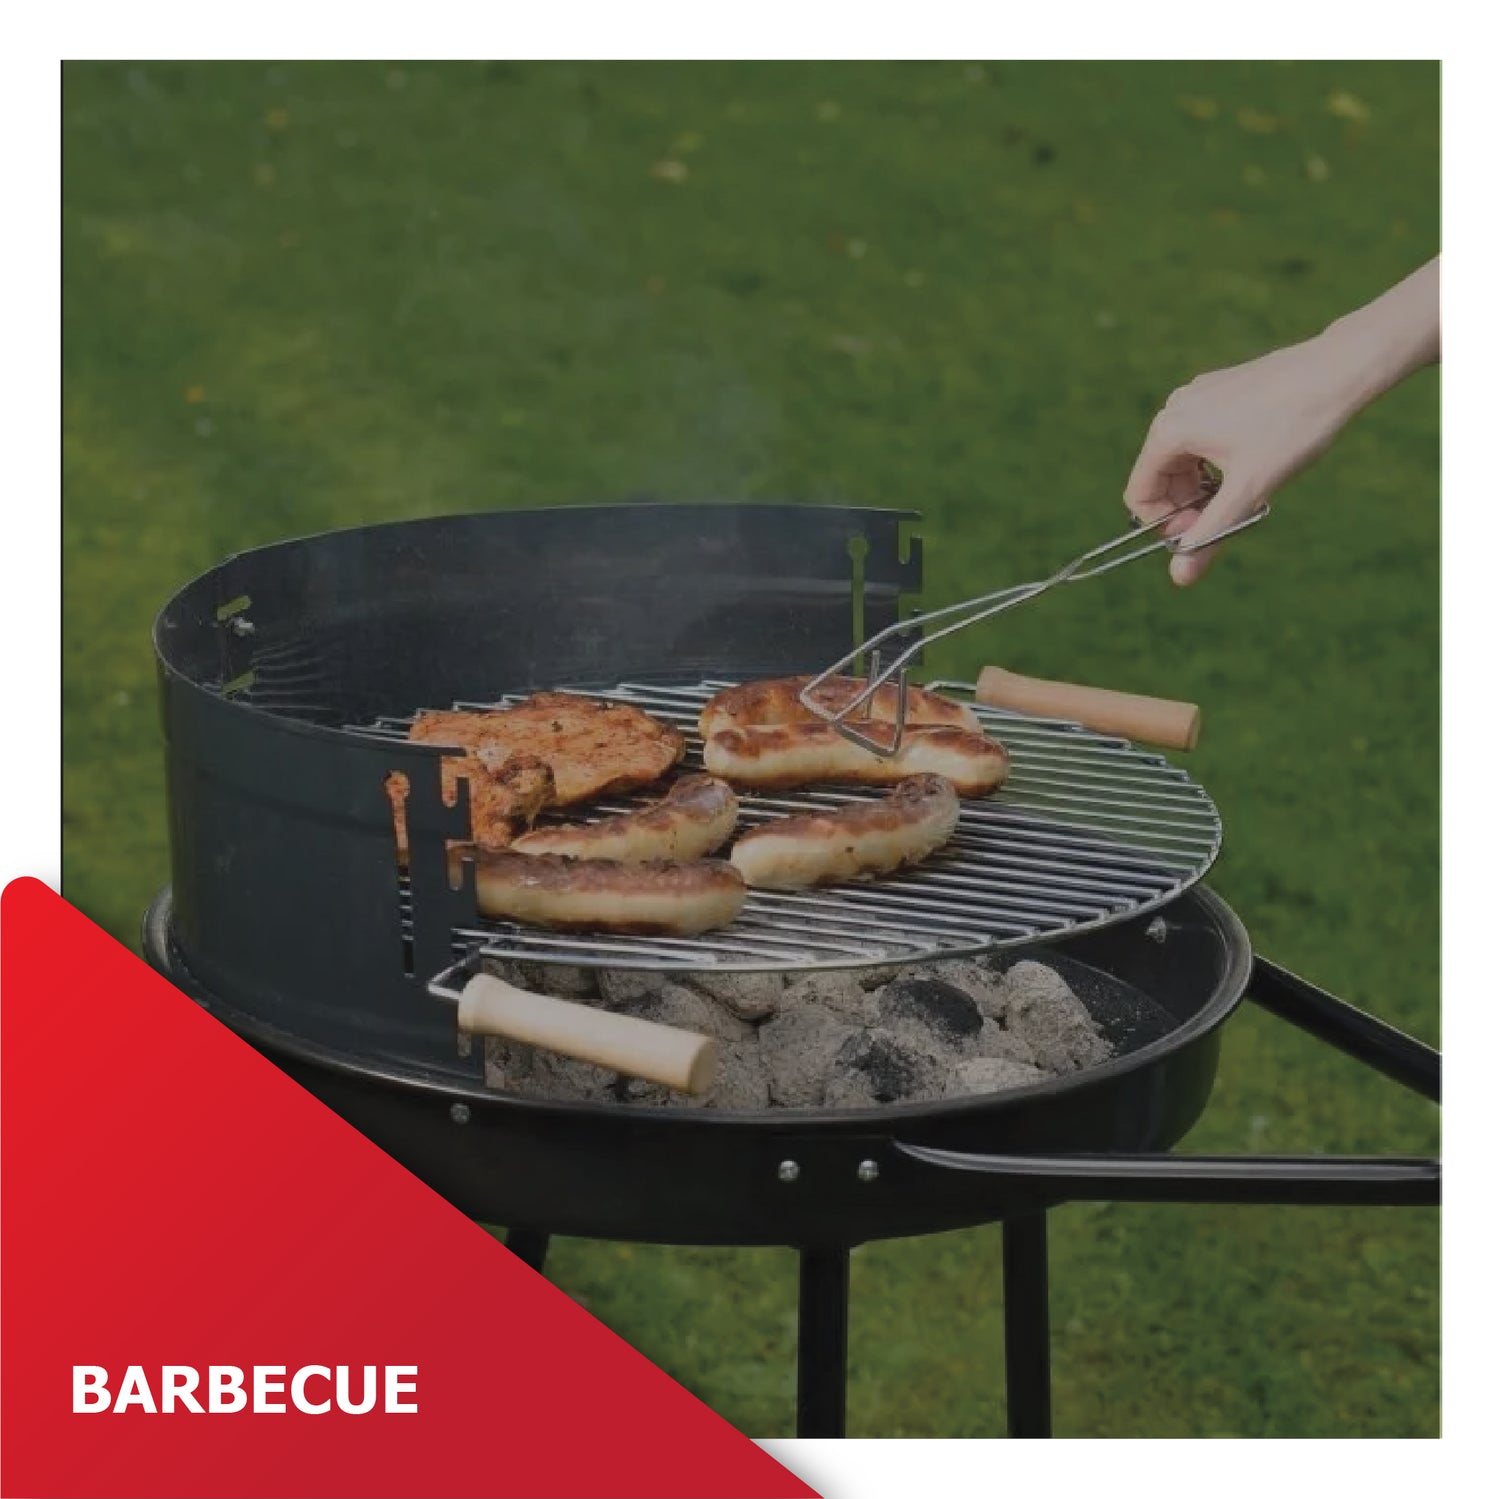 Barbecue | Category